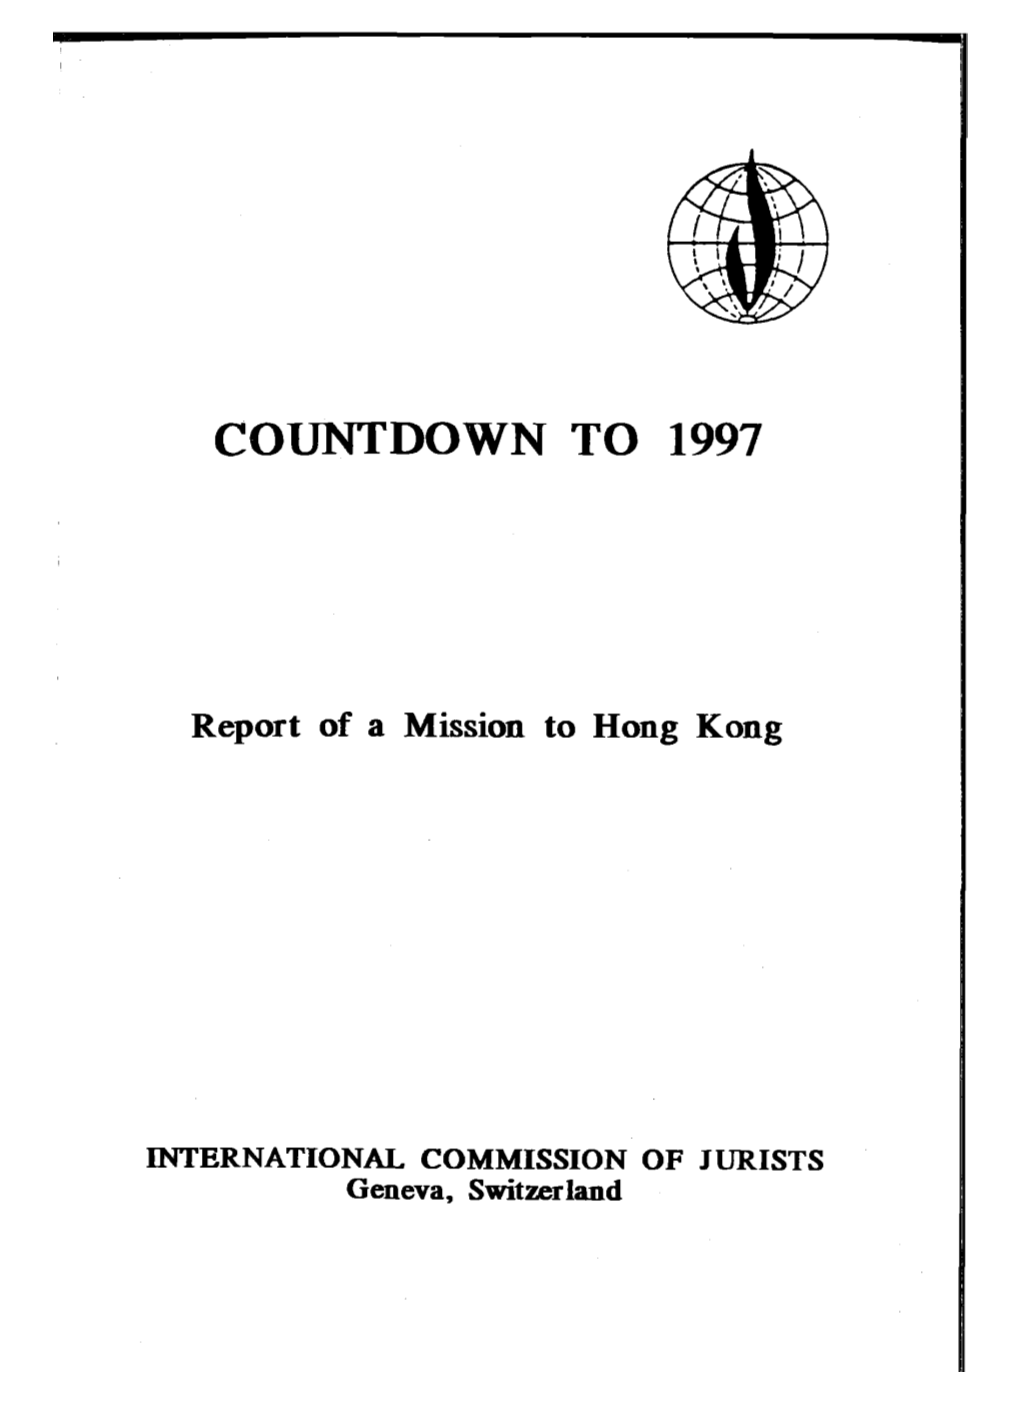 COUNTDOWN to 1997 Report of A